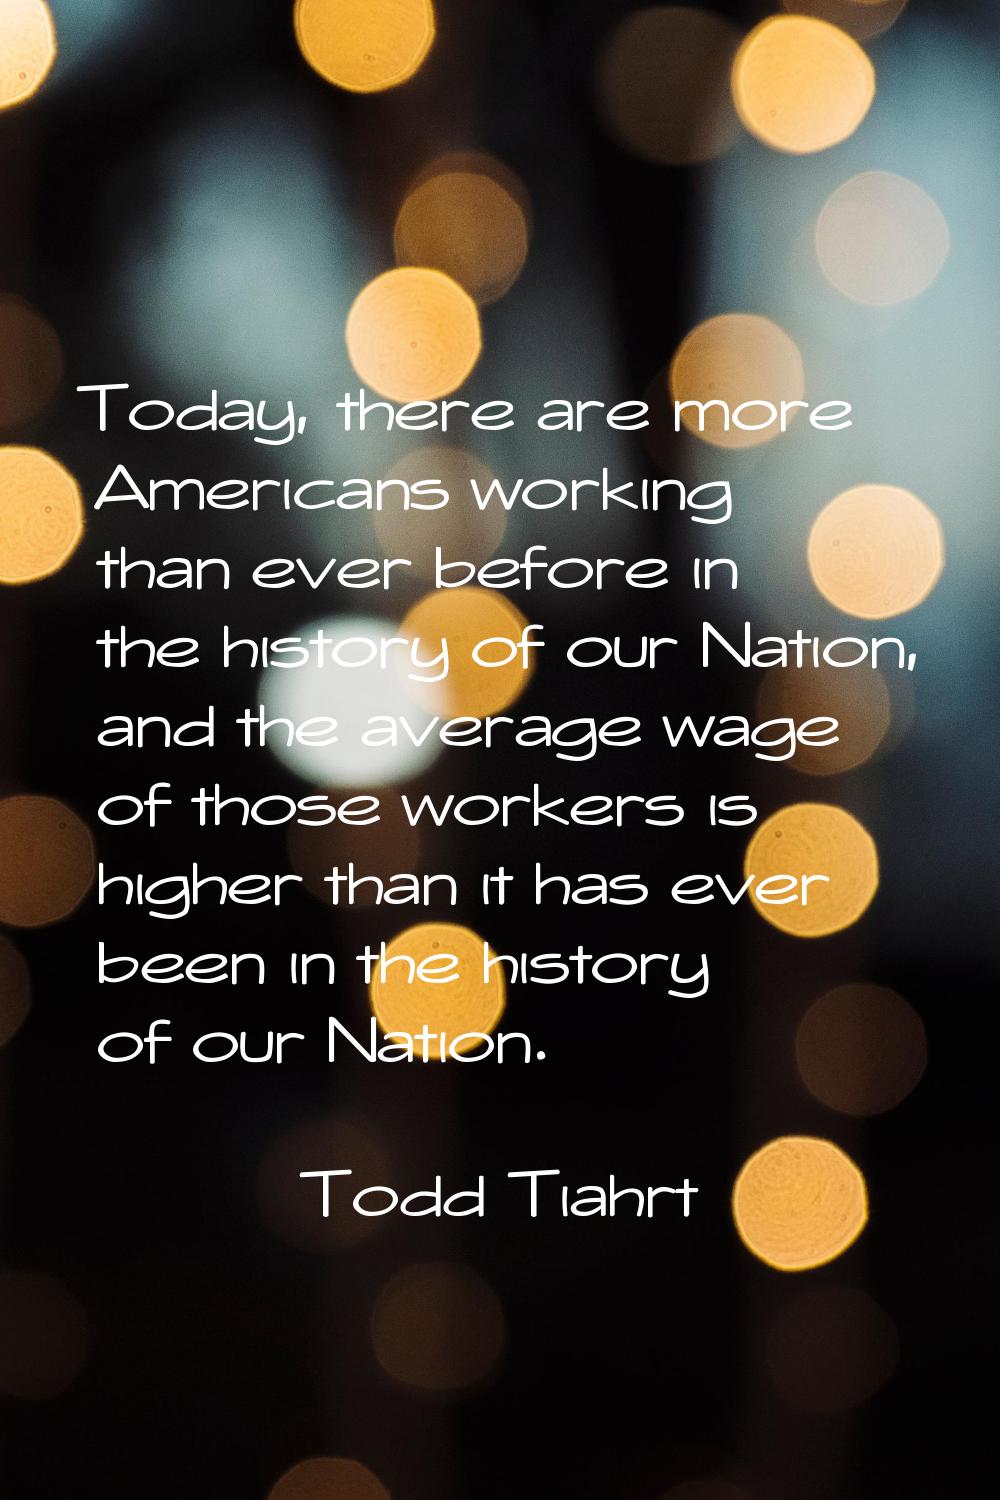 Today, there are more Americans working than ever before in the history of our Nation, and the aver